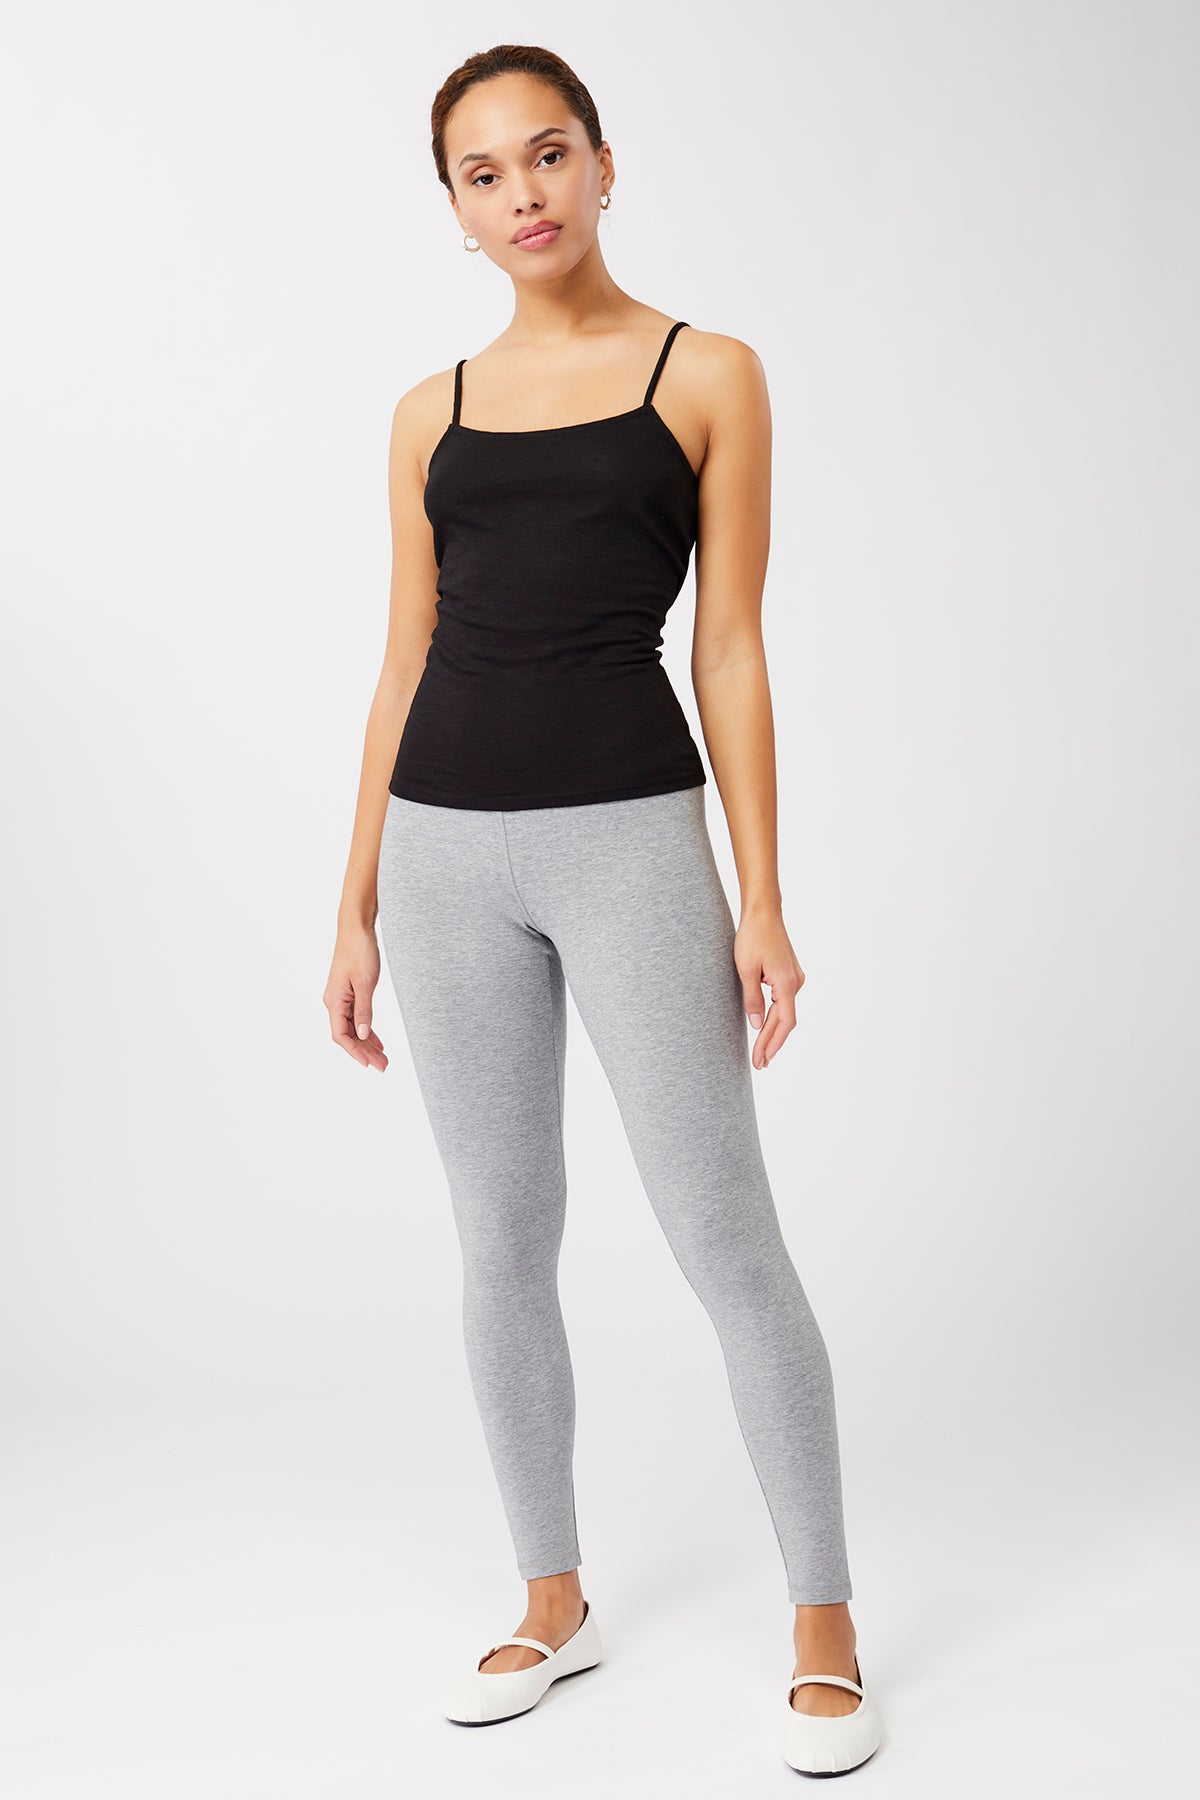 Mandala Yoga Top Schwarz Outfit Front - Holly Top